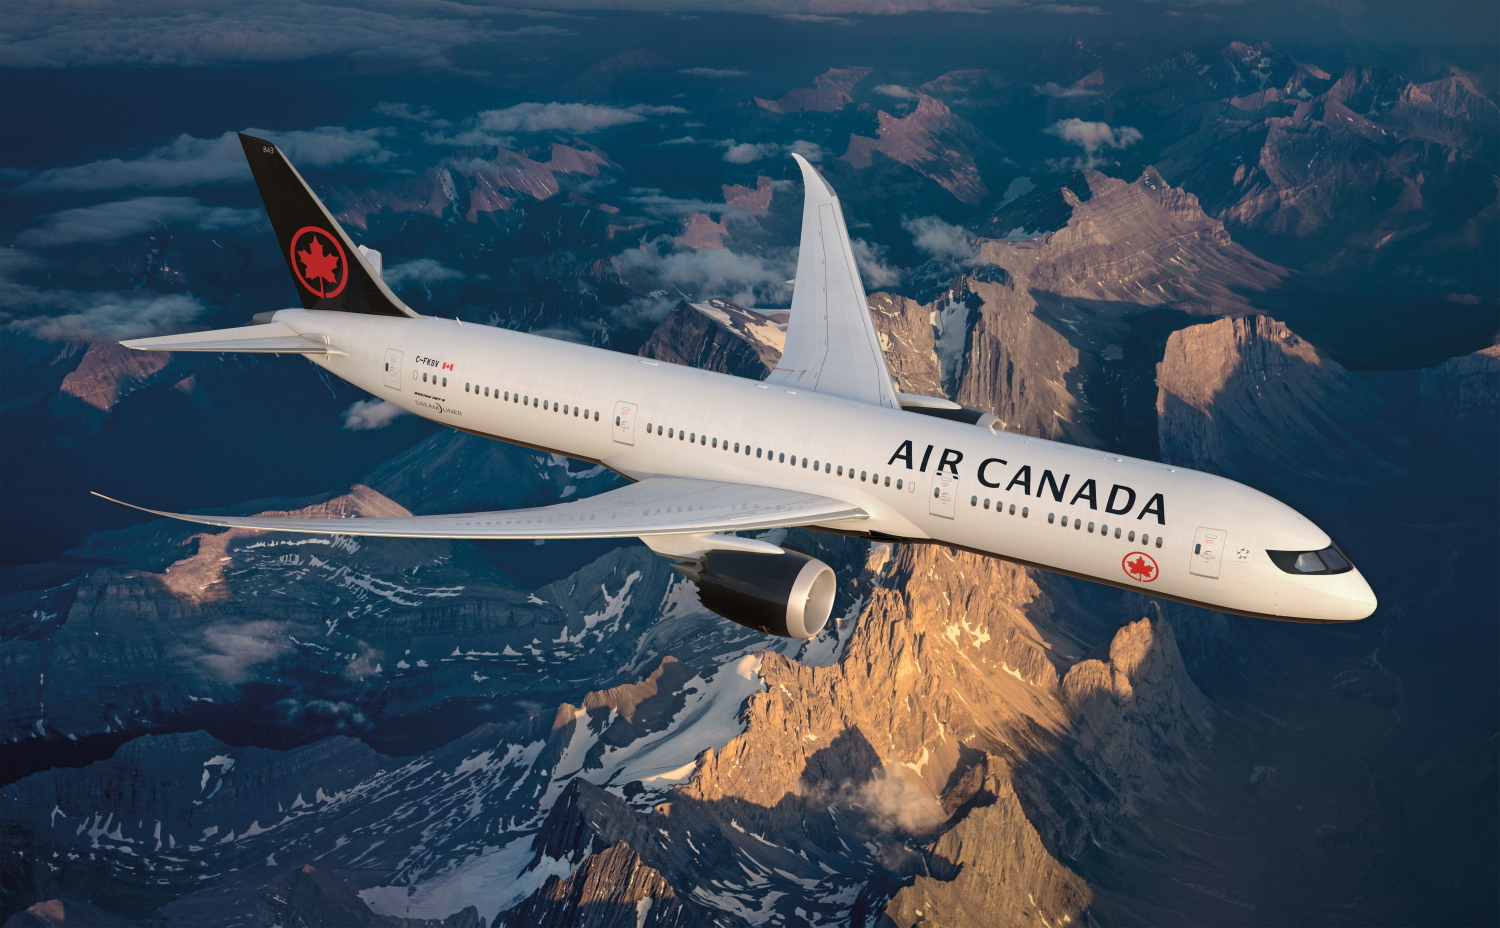 Air Canada Boeing 787-8 with the airline's brand new livery